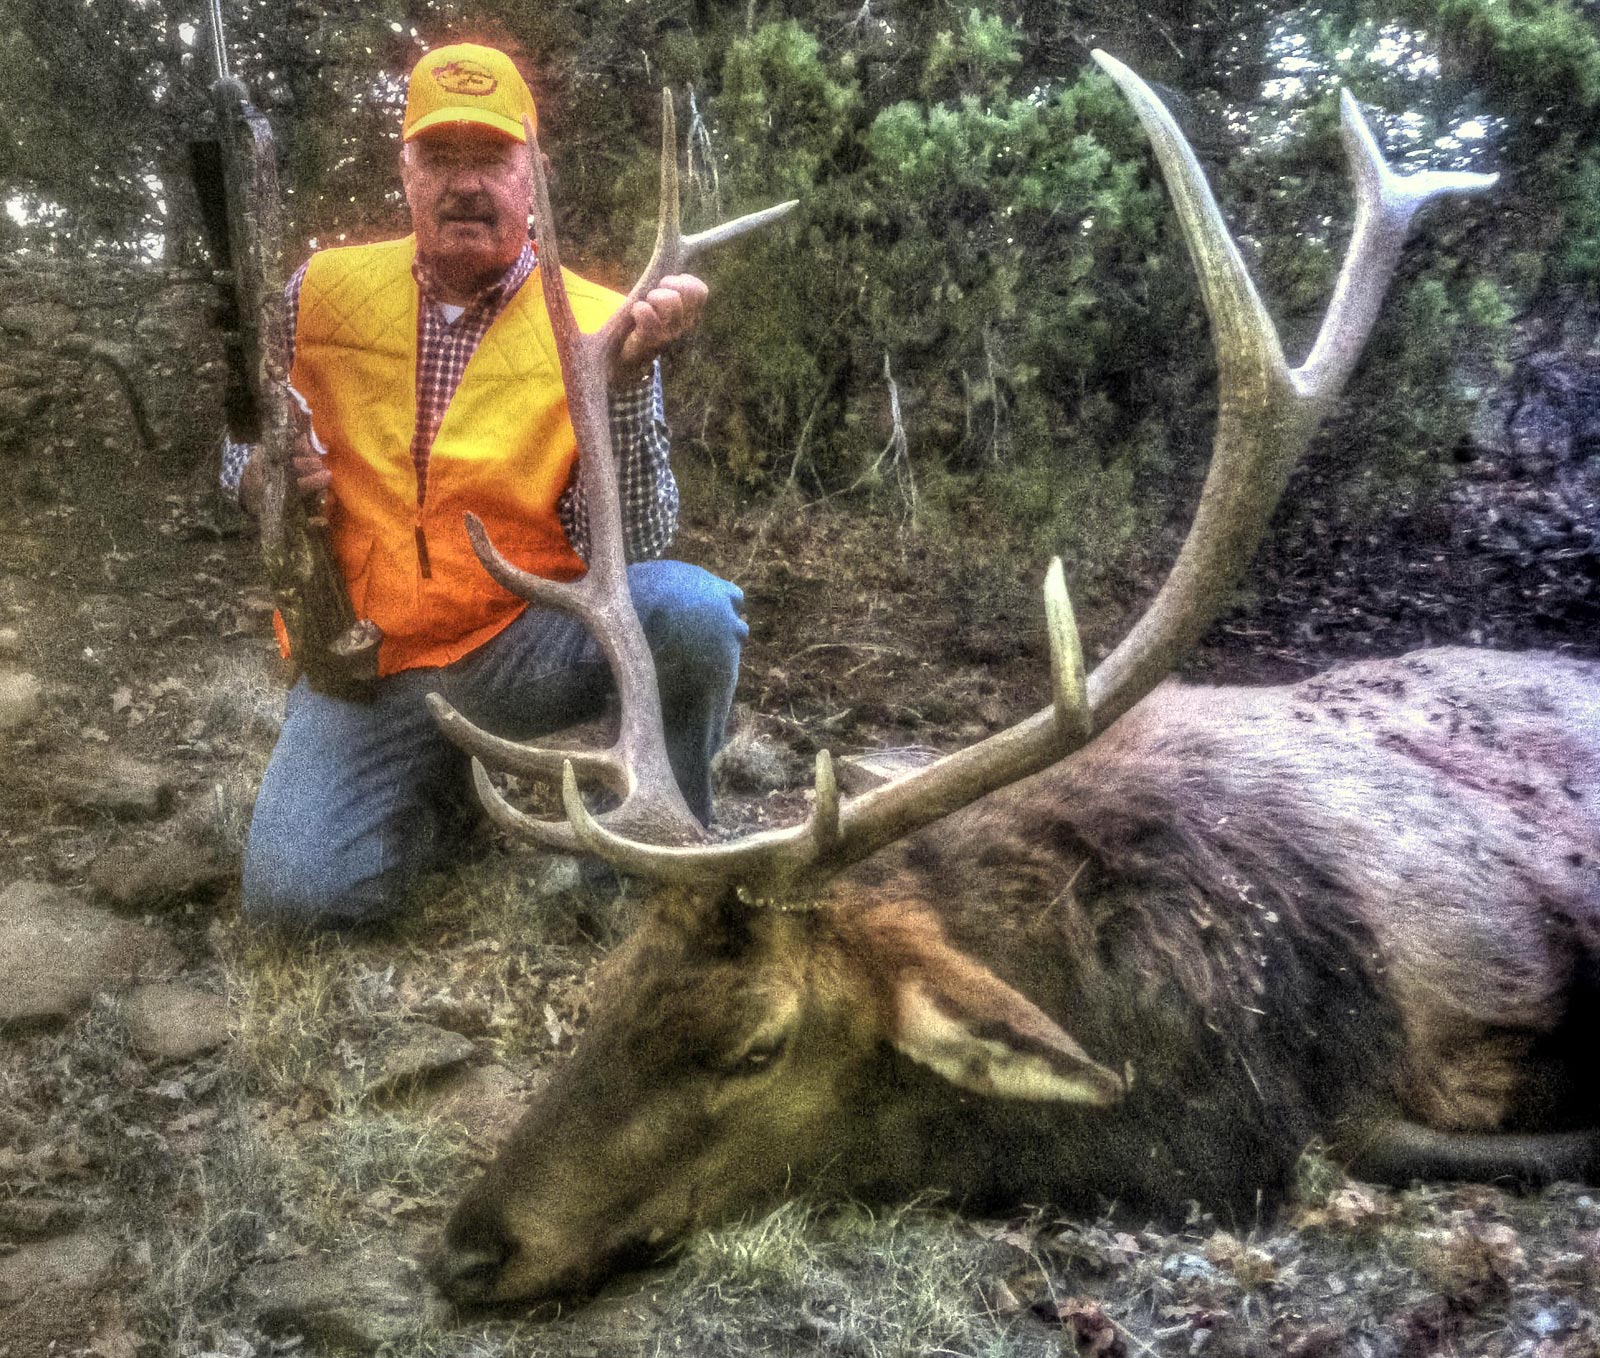 Hunter with a harvested bull elk.